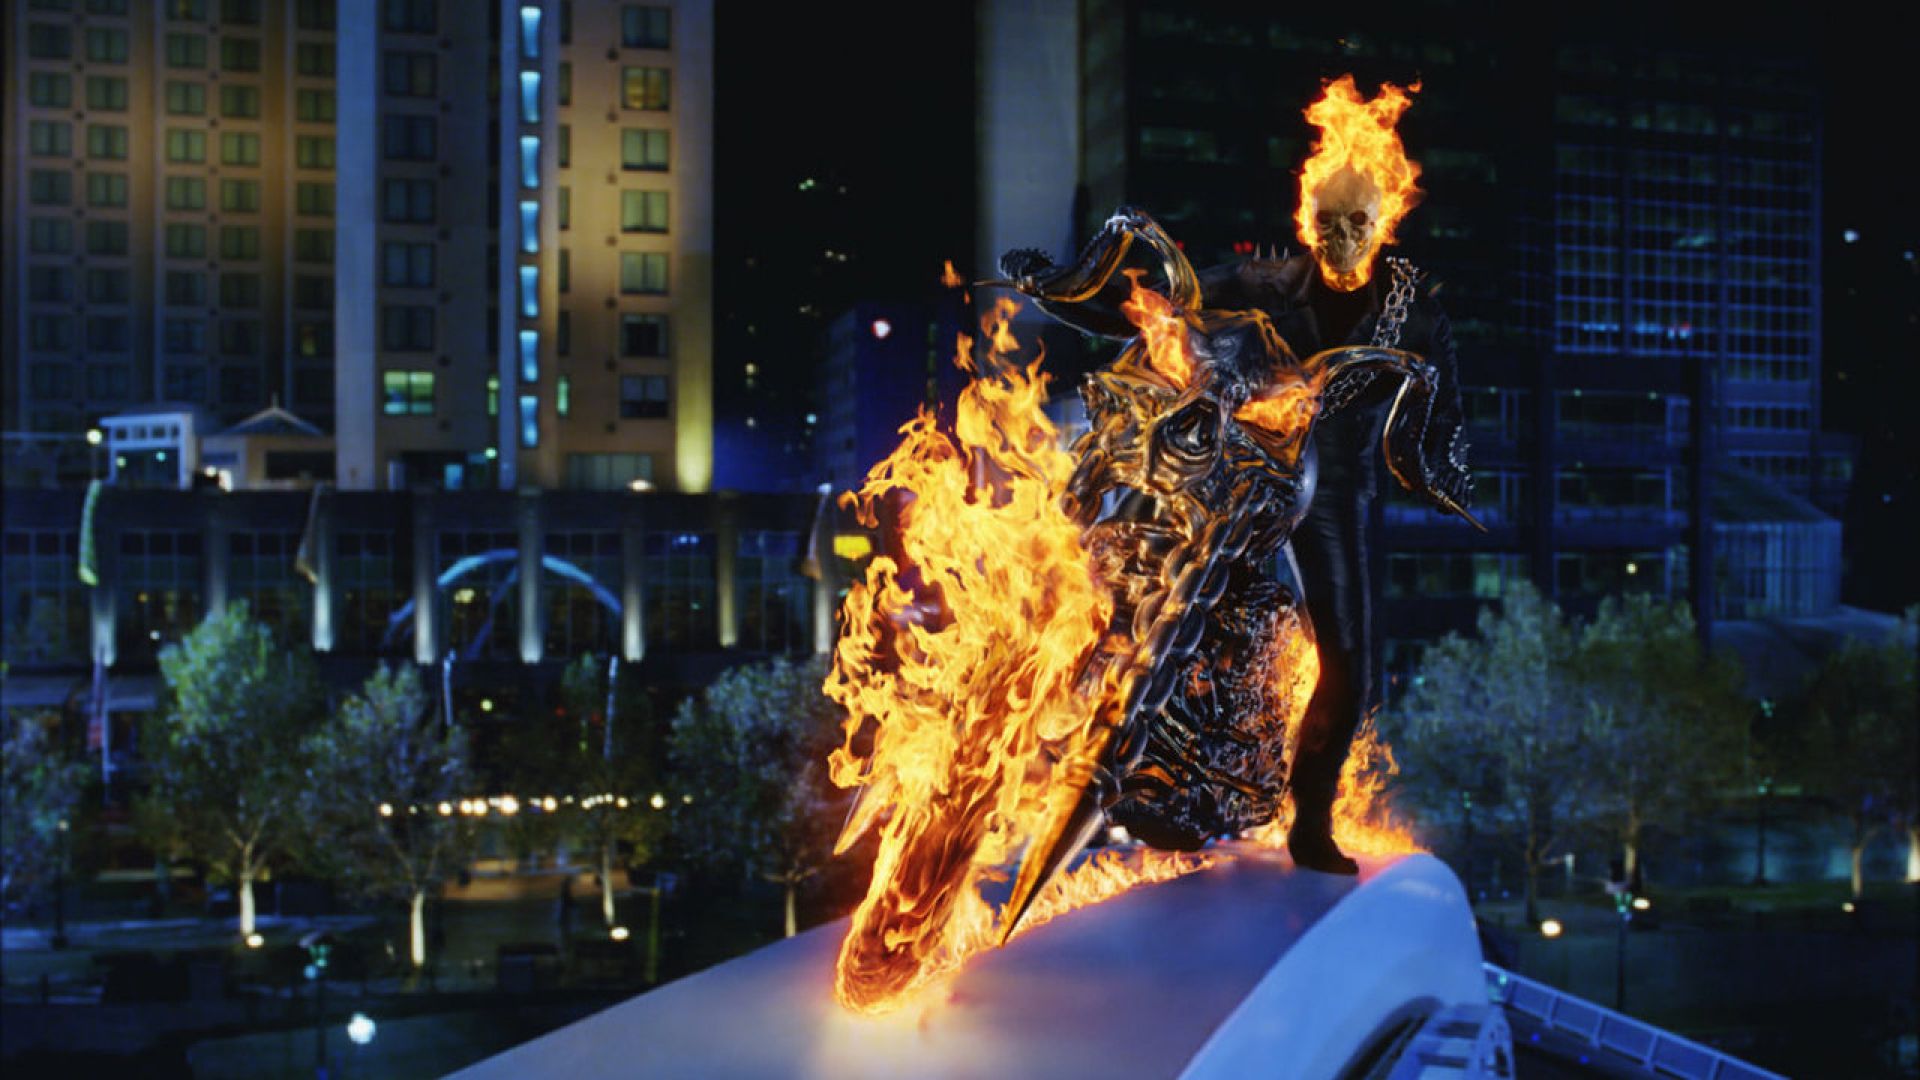 ghost rider film series characters